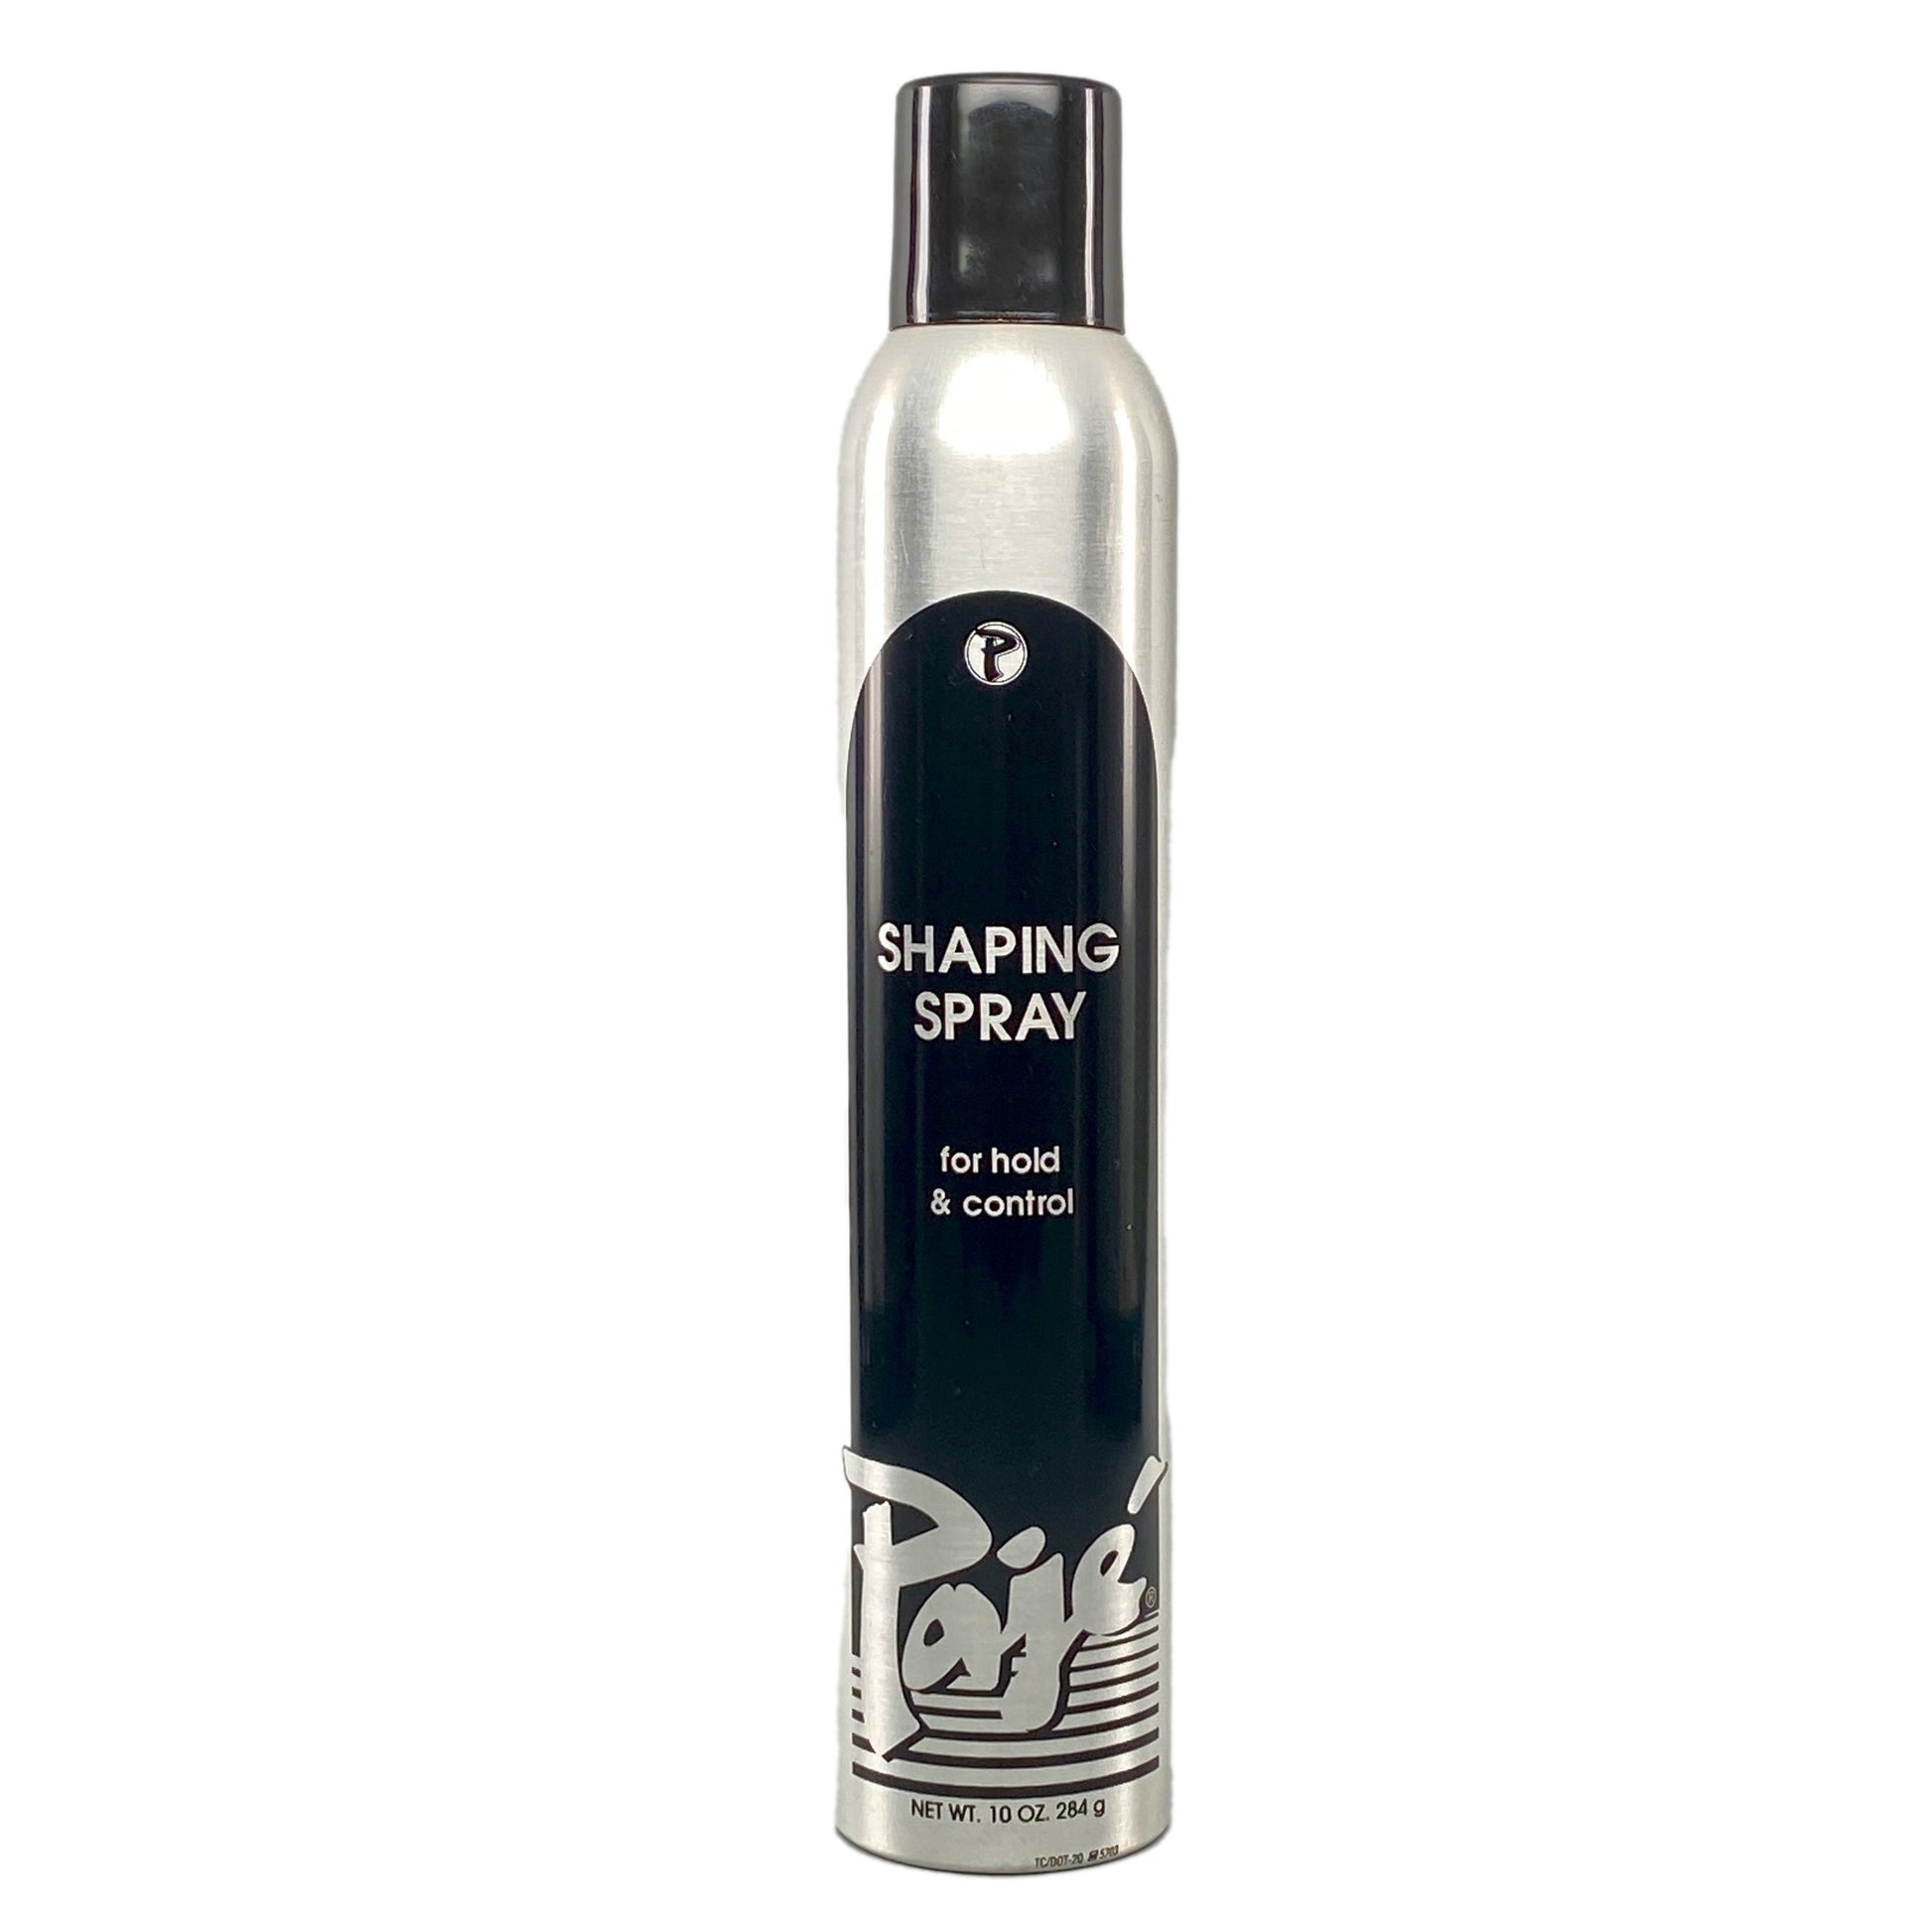 Pajé Shaping Spray is a fast-drying, flexible finishing spray with exceptional hold. Humidity resistant and easy to brush through, leaving no sticky residue or build up even after respraying. Great for long hair that needs hold yet free movement.   